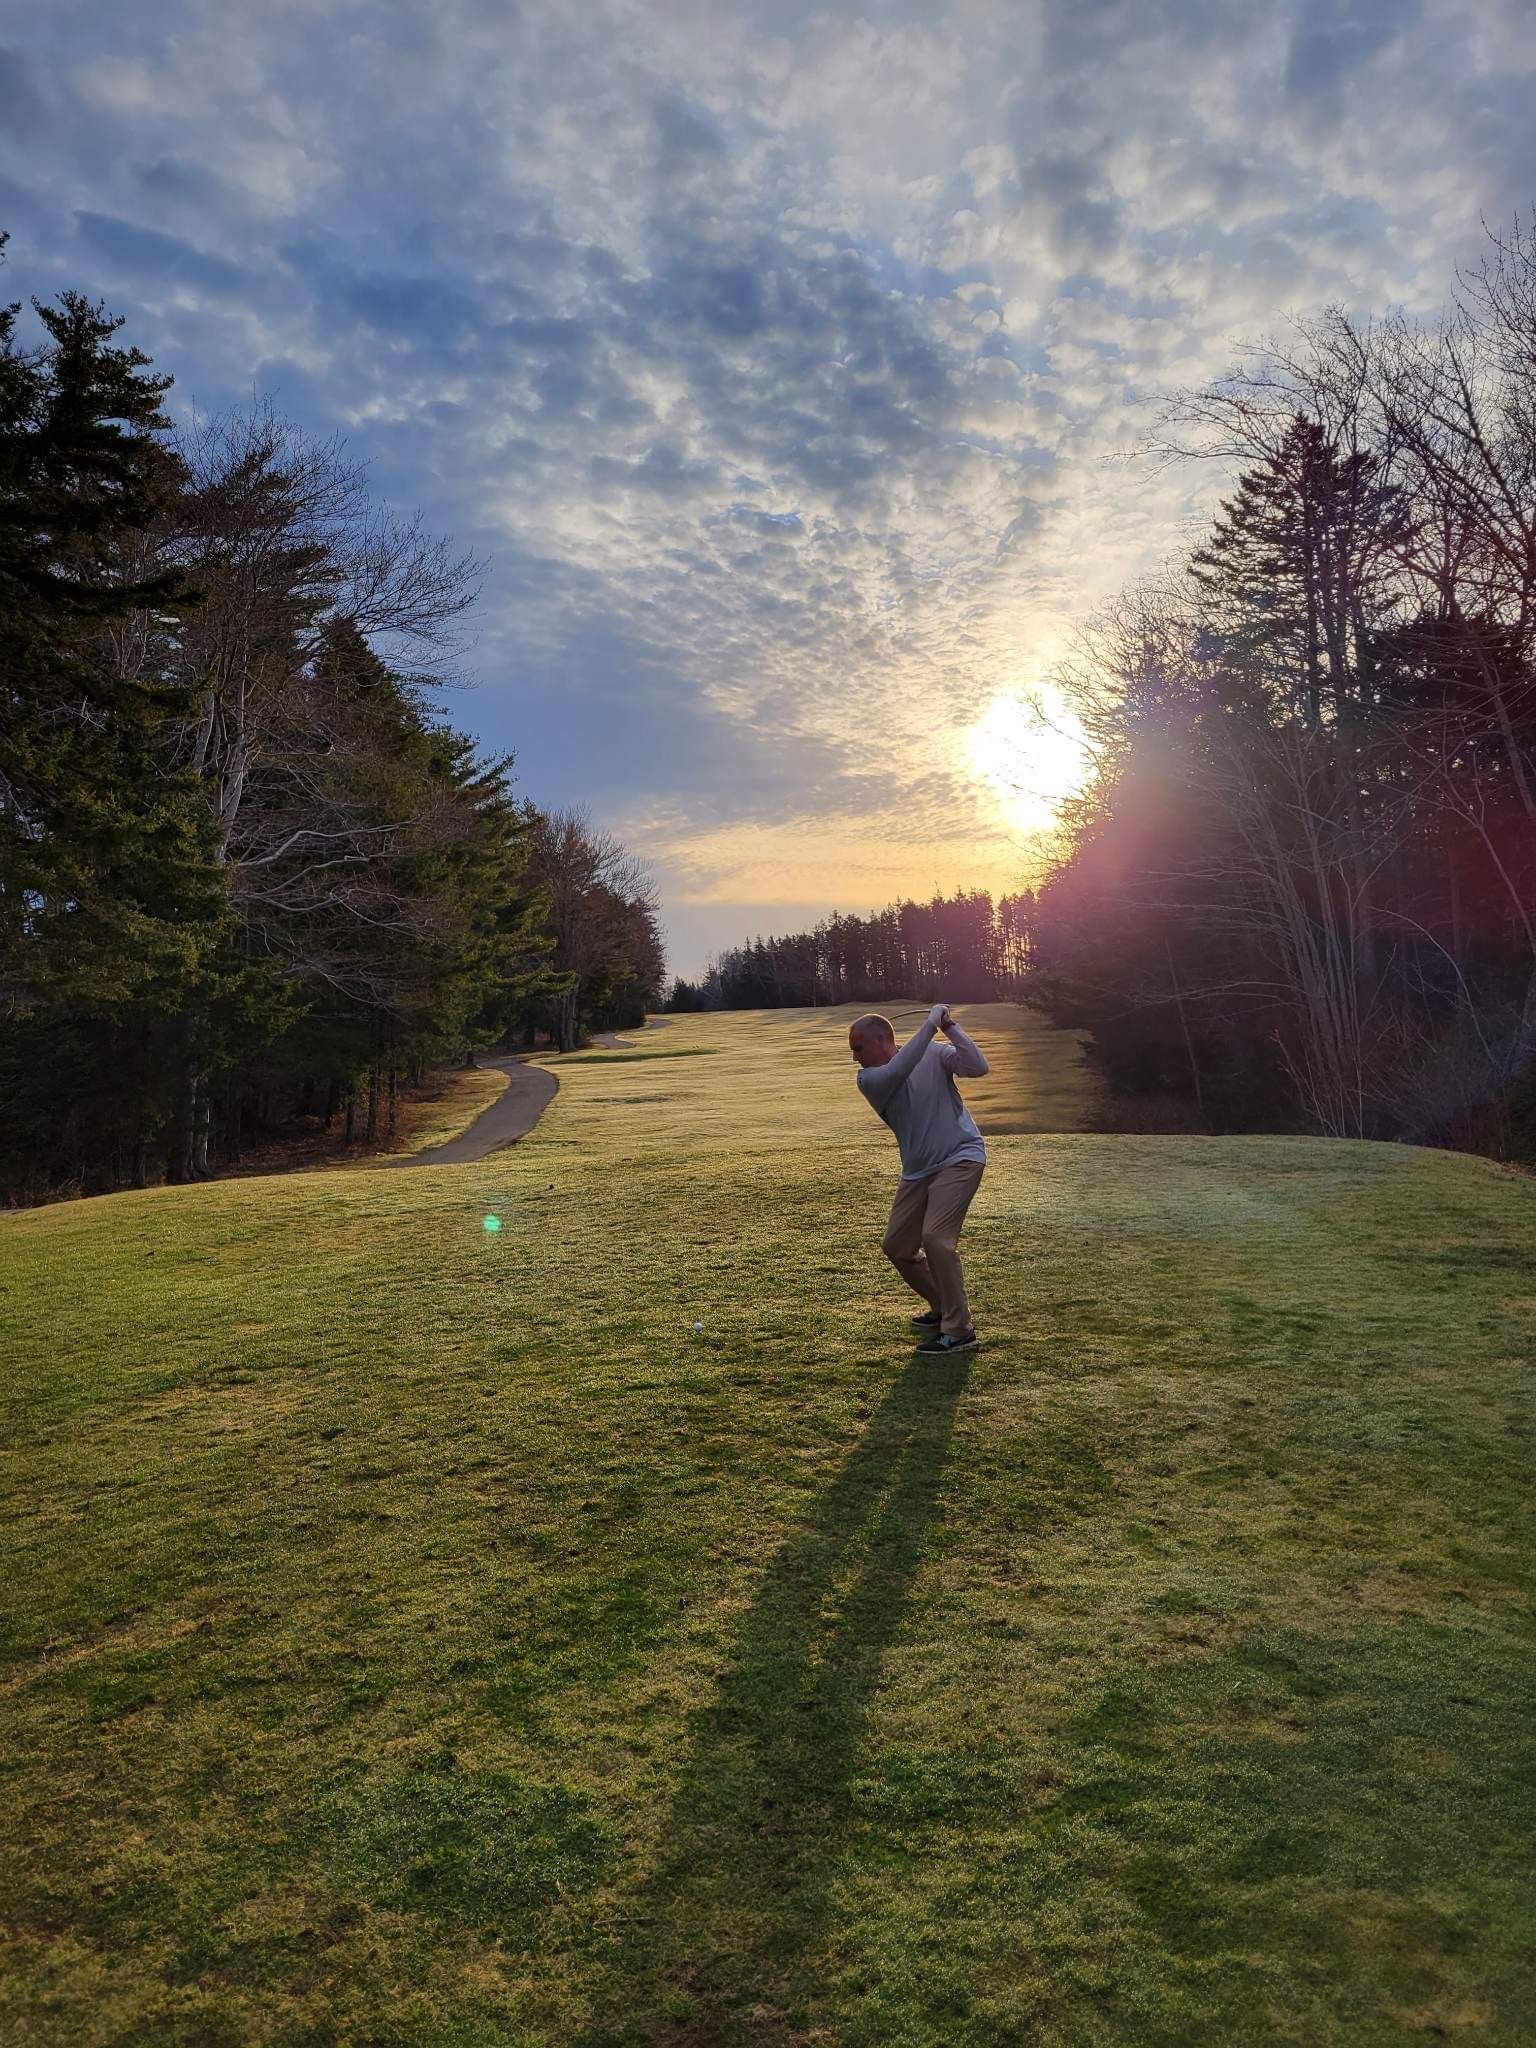 A man is swinging a golf club on a golf course at sunset.